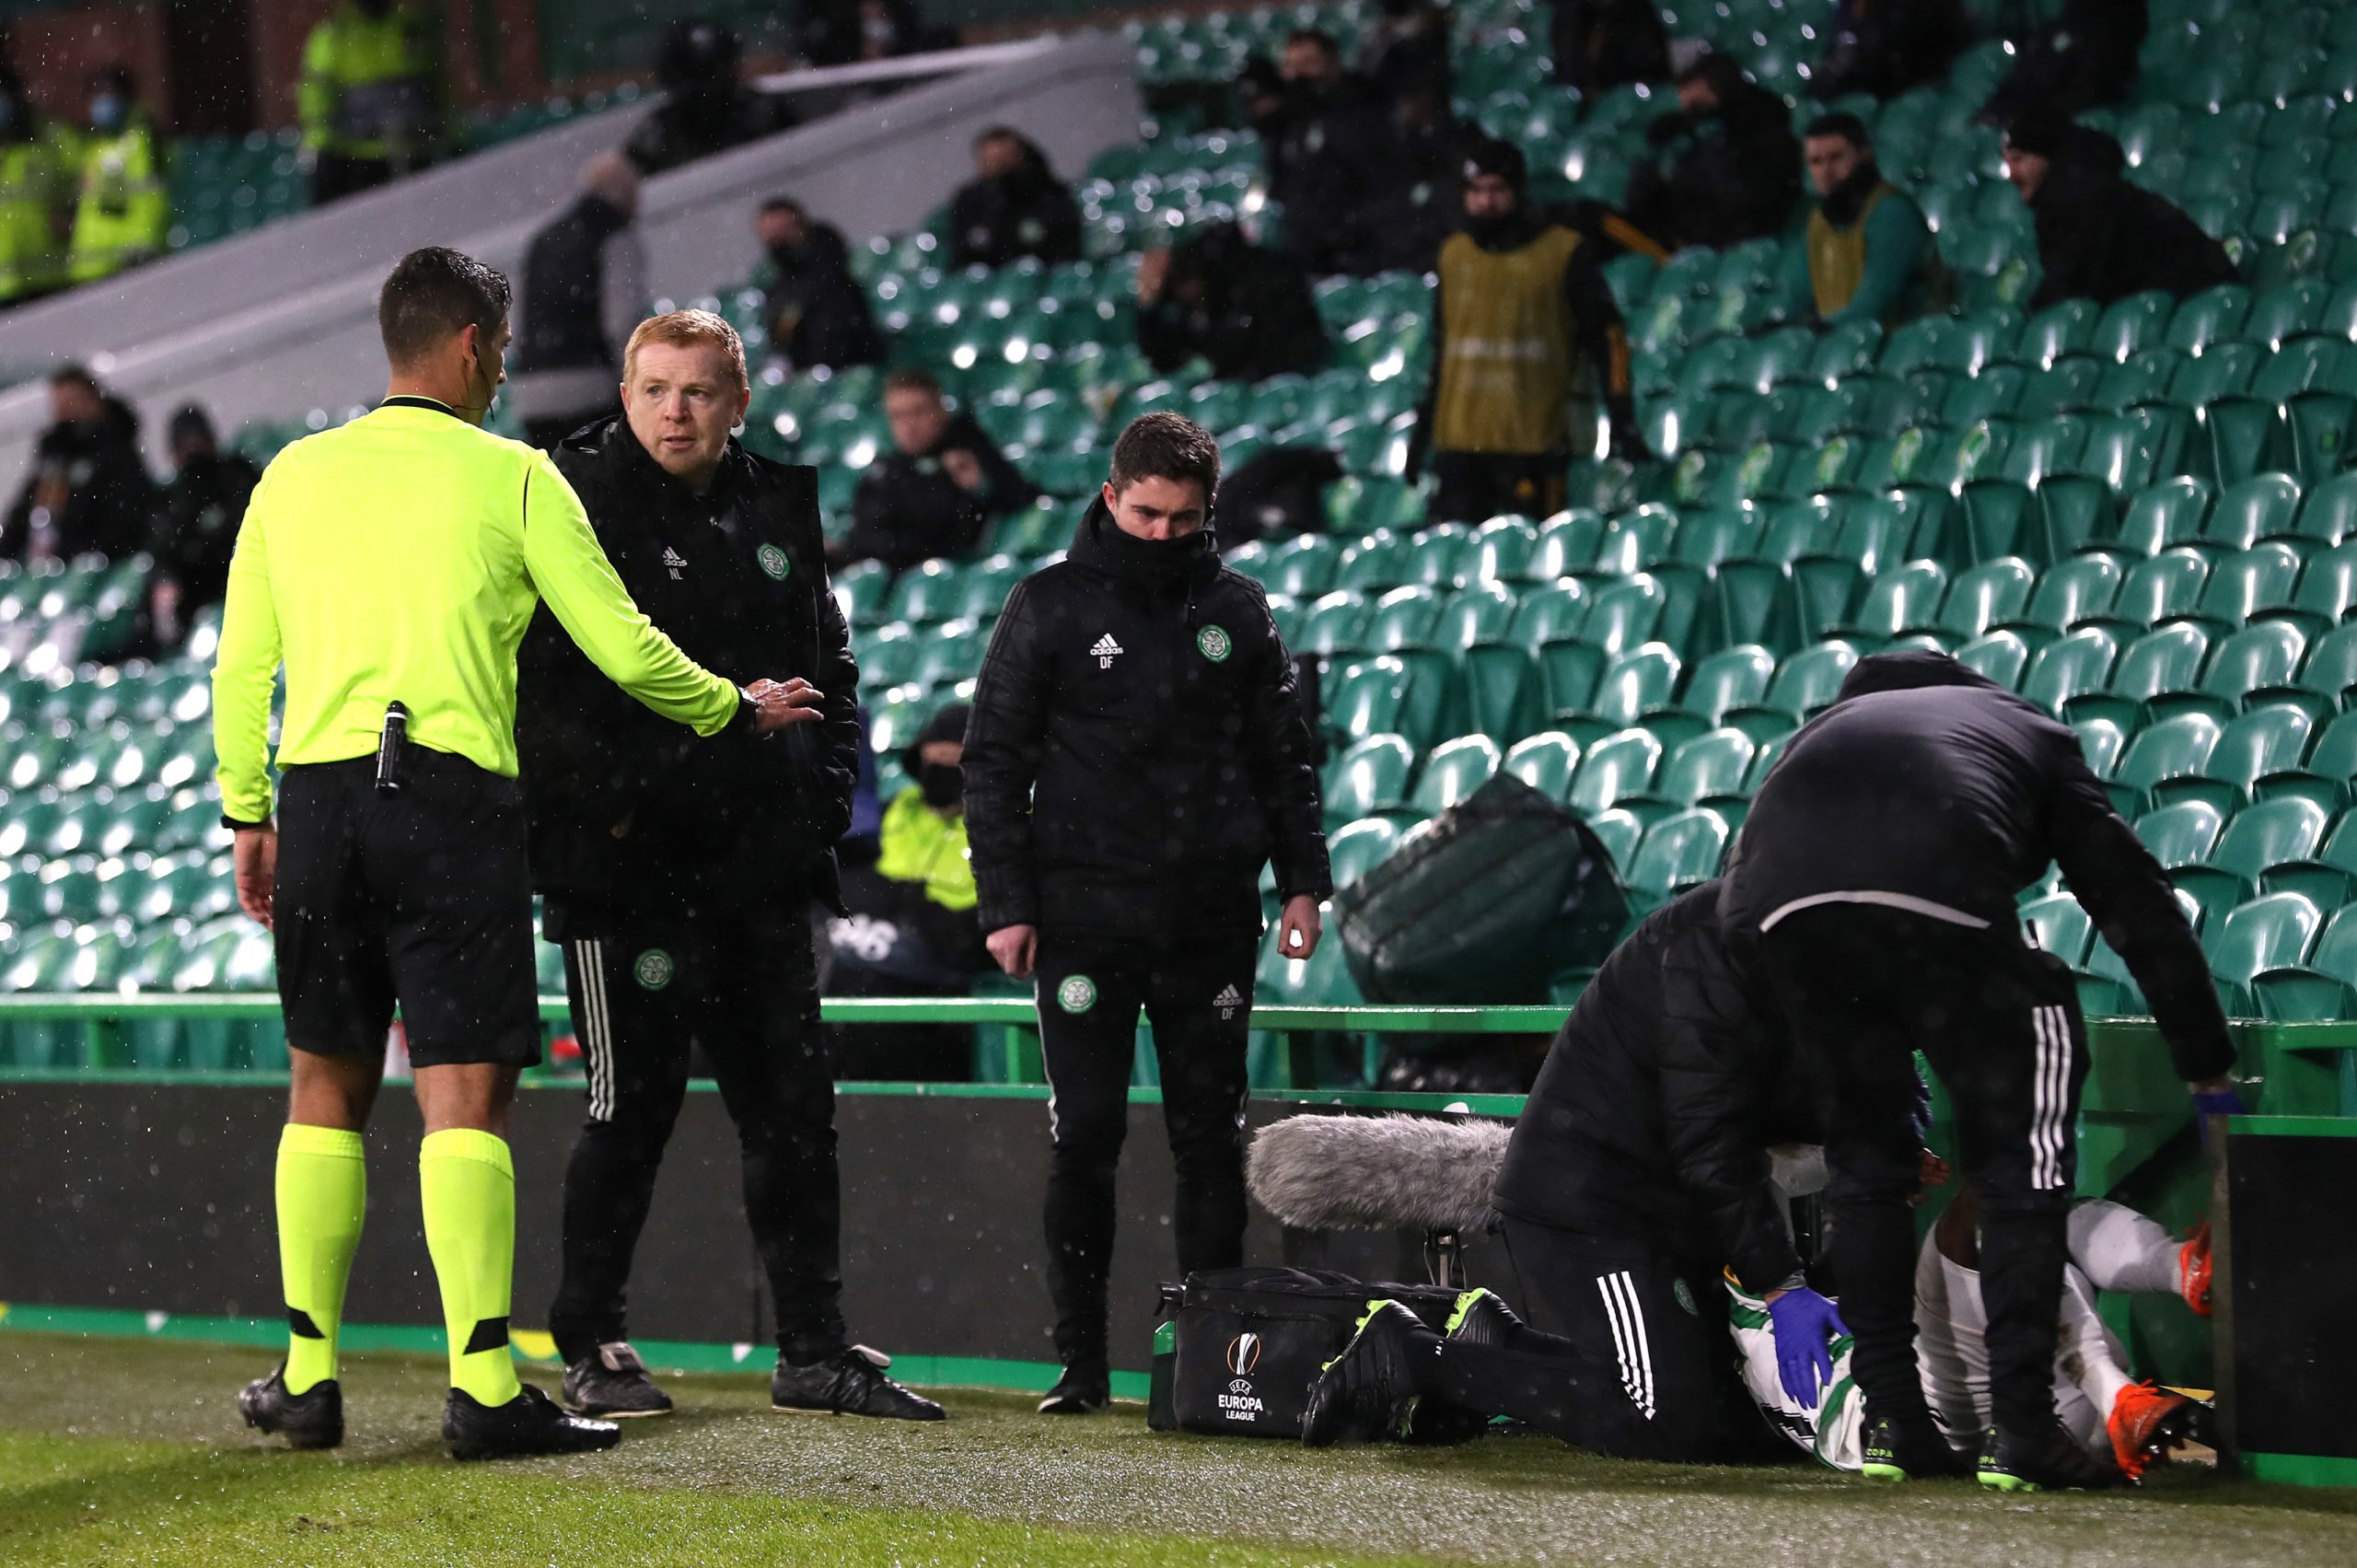 Celtic gaffer Neil Lennon opens up on concussions; supports new rules